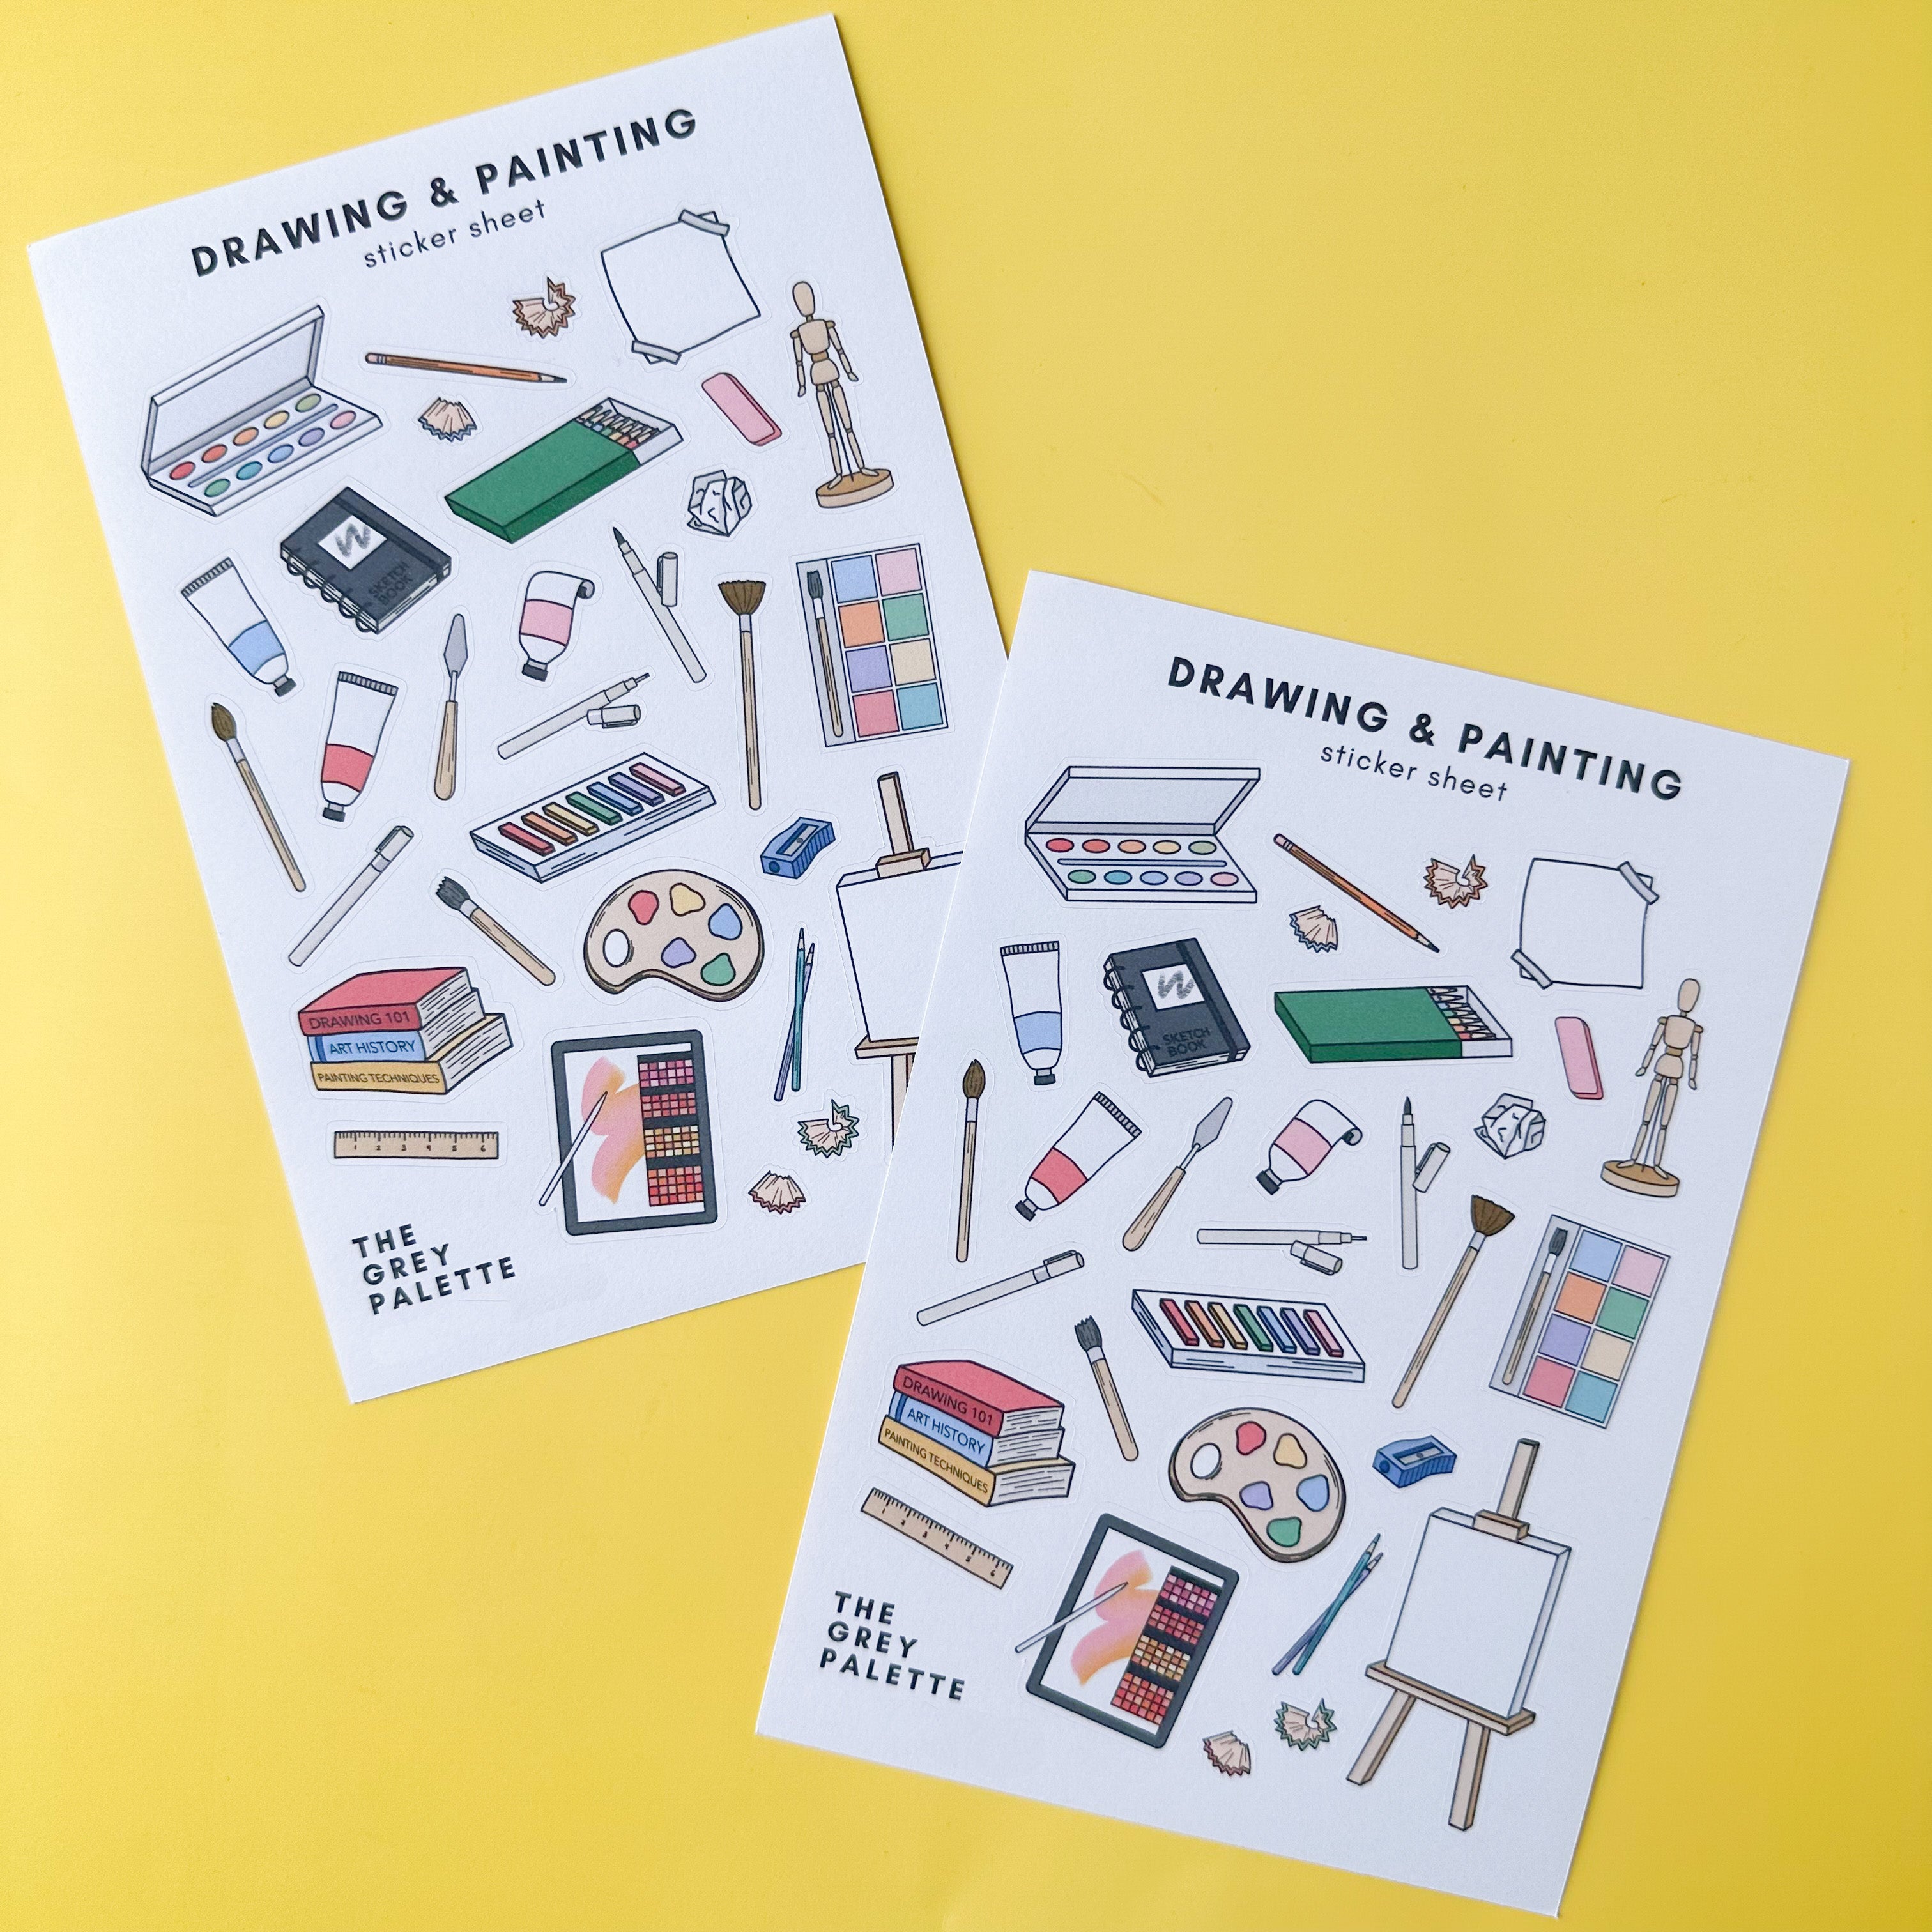 This sticker sheet freatures illusrations of paining and drawing tools perfect for a craft enthusiast or journaling addict. This sticker sheet is designed by The Grey Palette and sold at BBB Supplies Craft Shop.